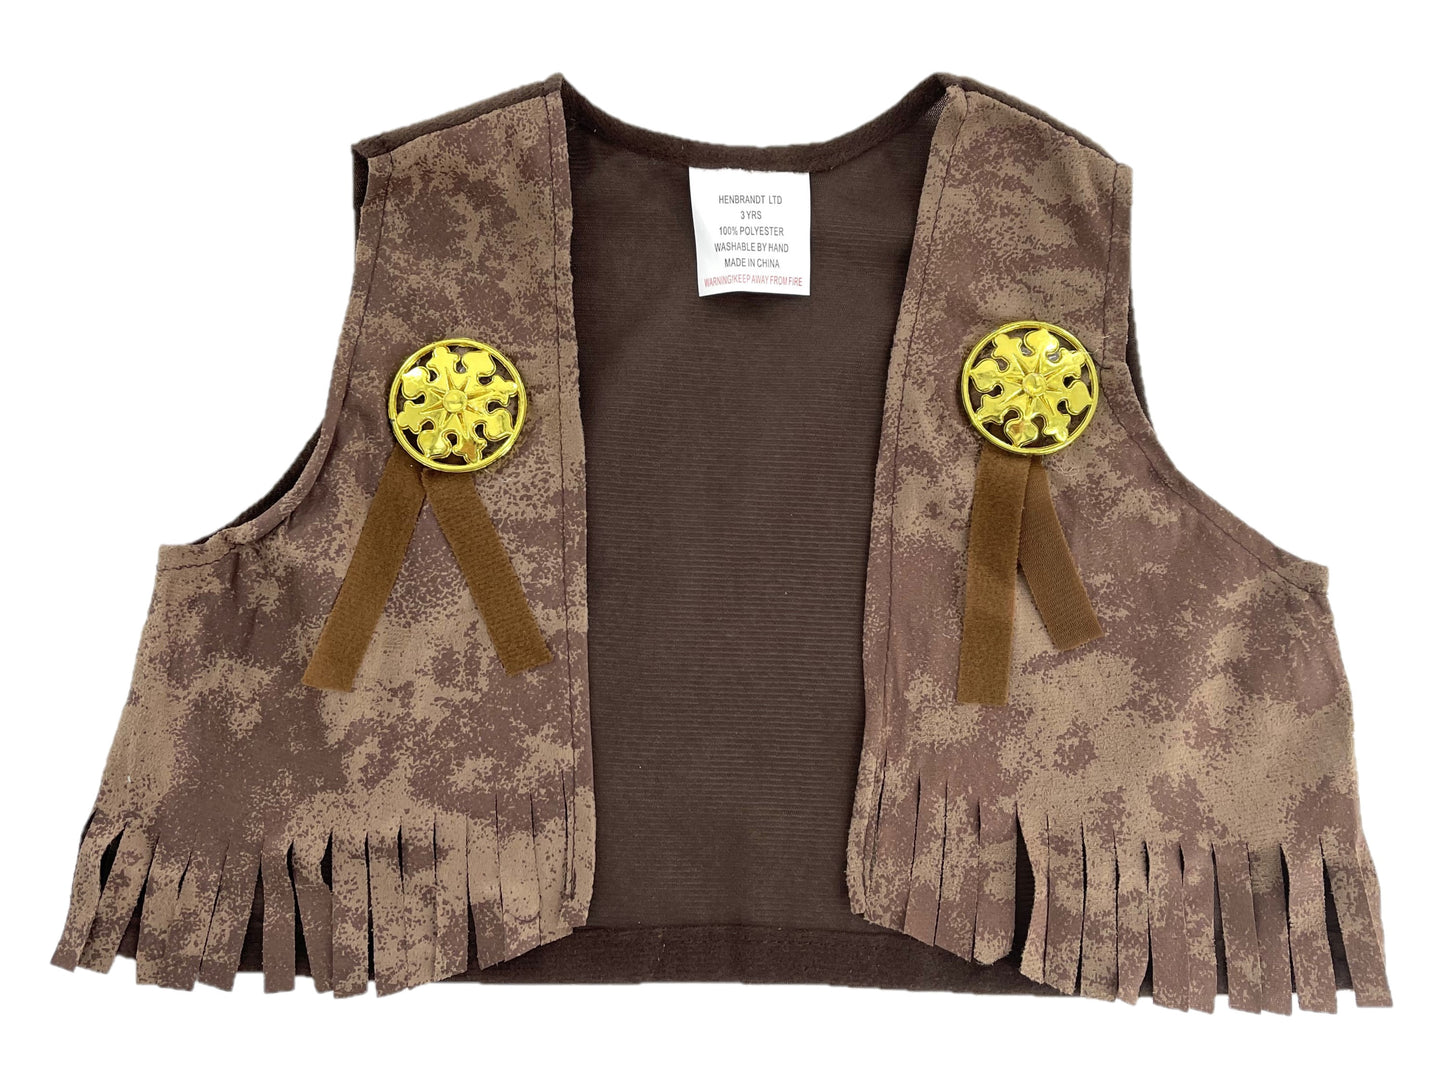 Cowboy Toddlers Fancy Dress Costume (Age 3)